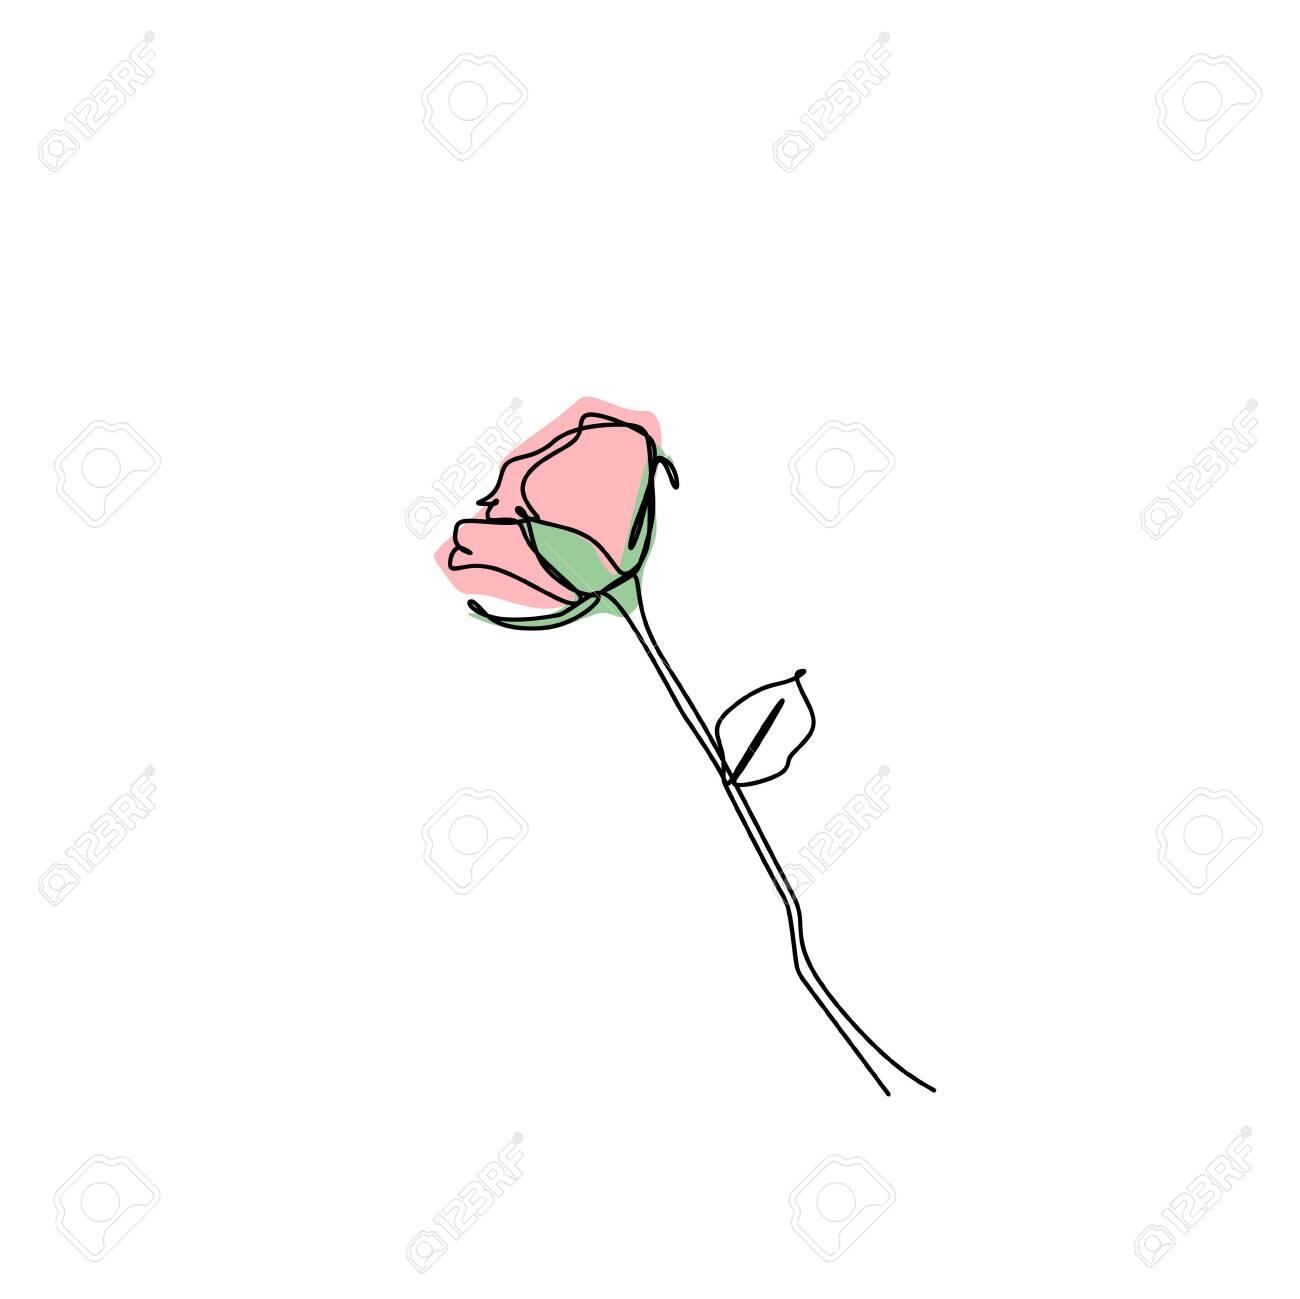 Single Continuous Line Drawing Of Rose Flower Minimalist Design